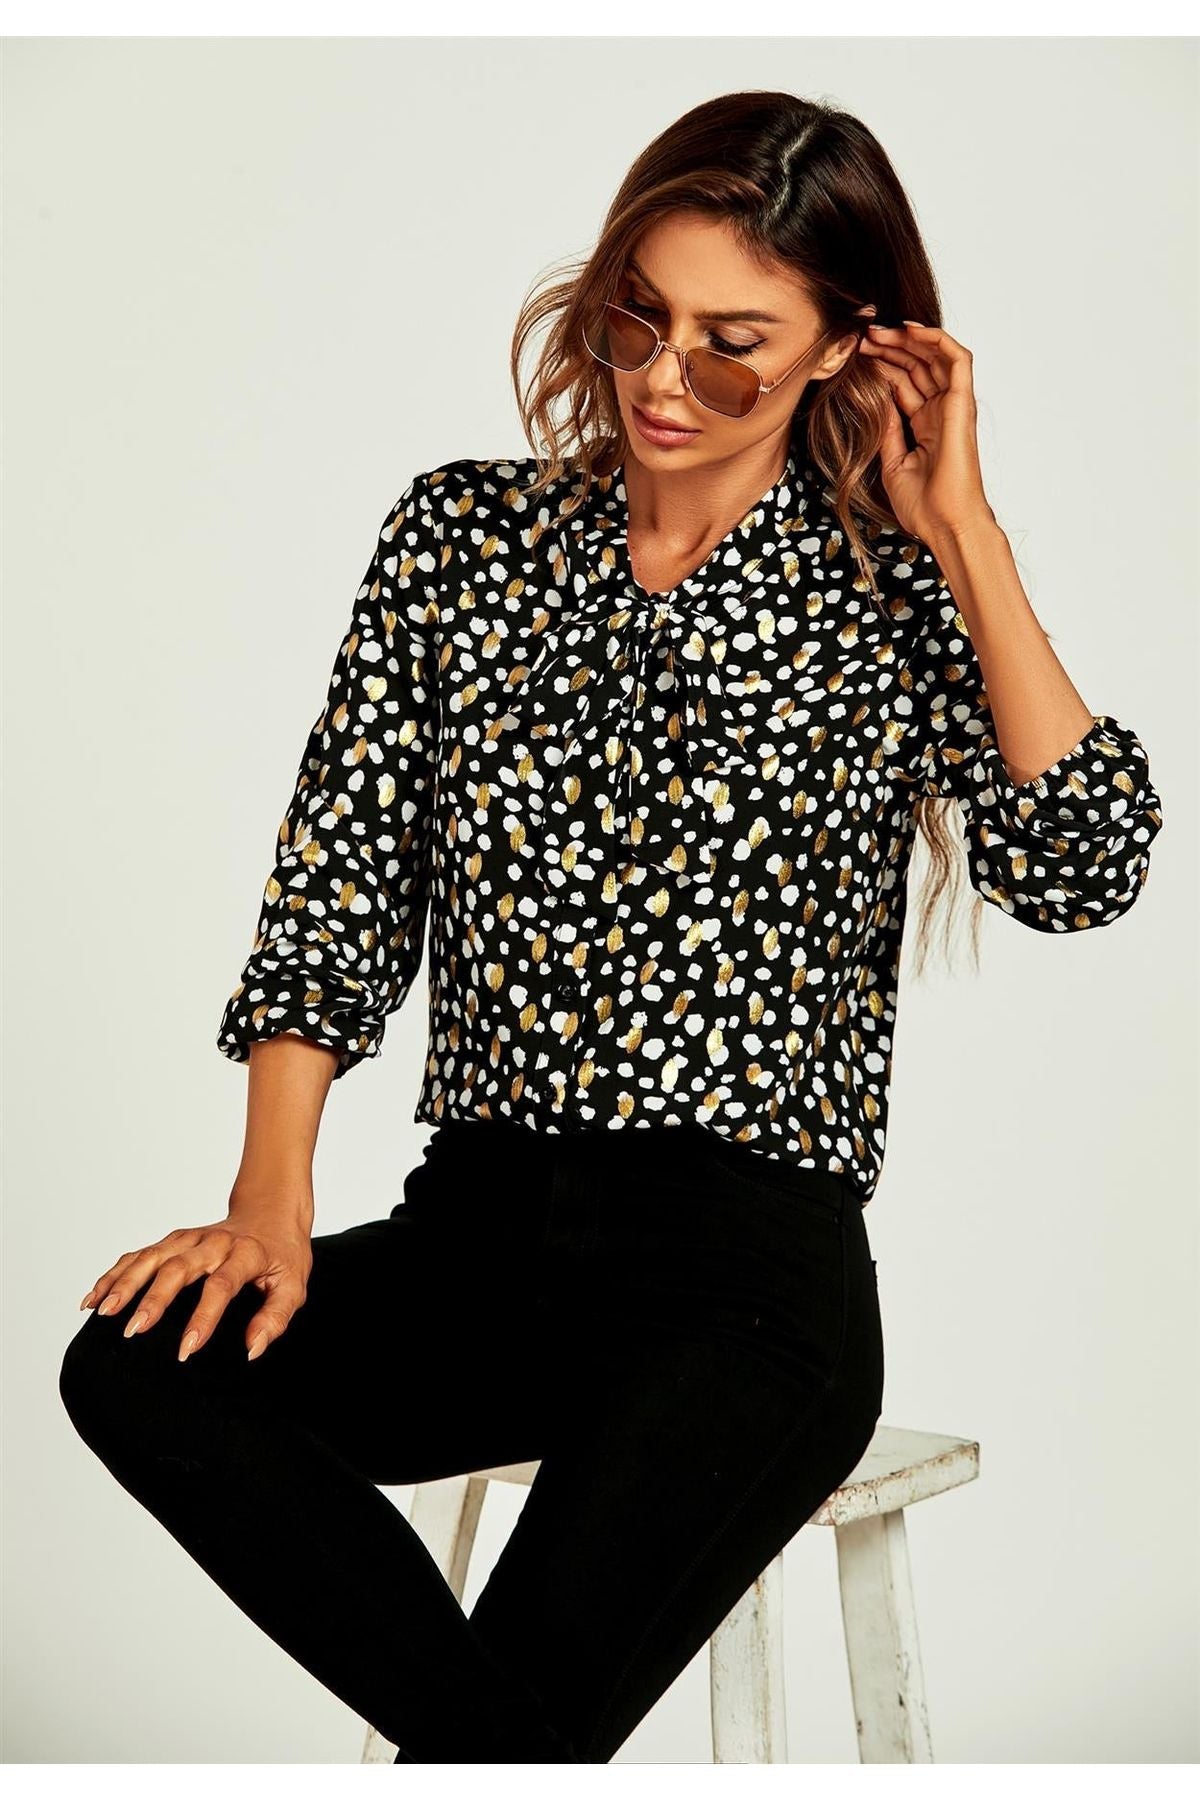 Gold Foil Leopard Print Pussybow Blouse/Top In Black FS494